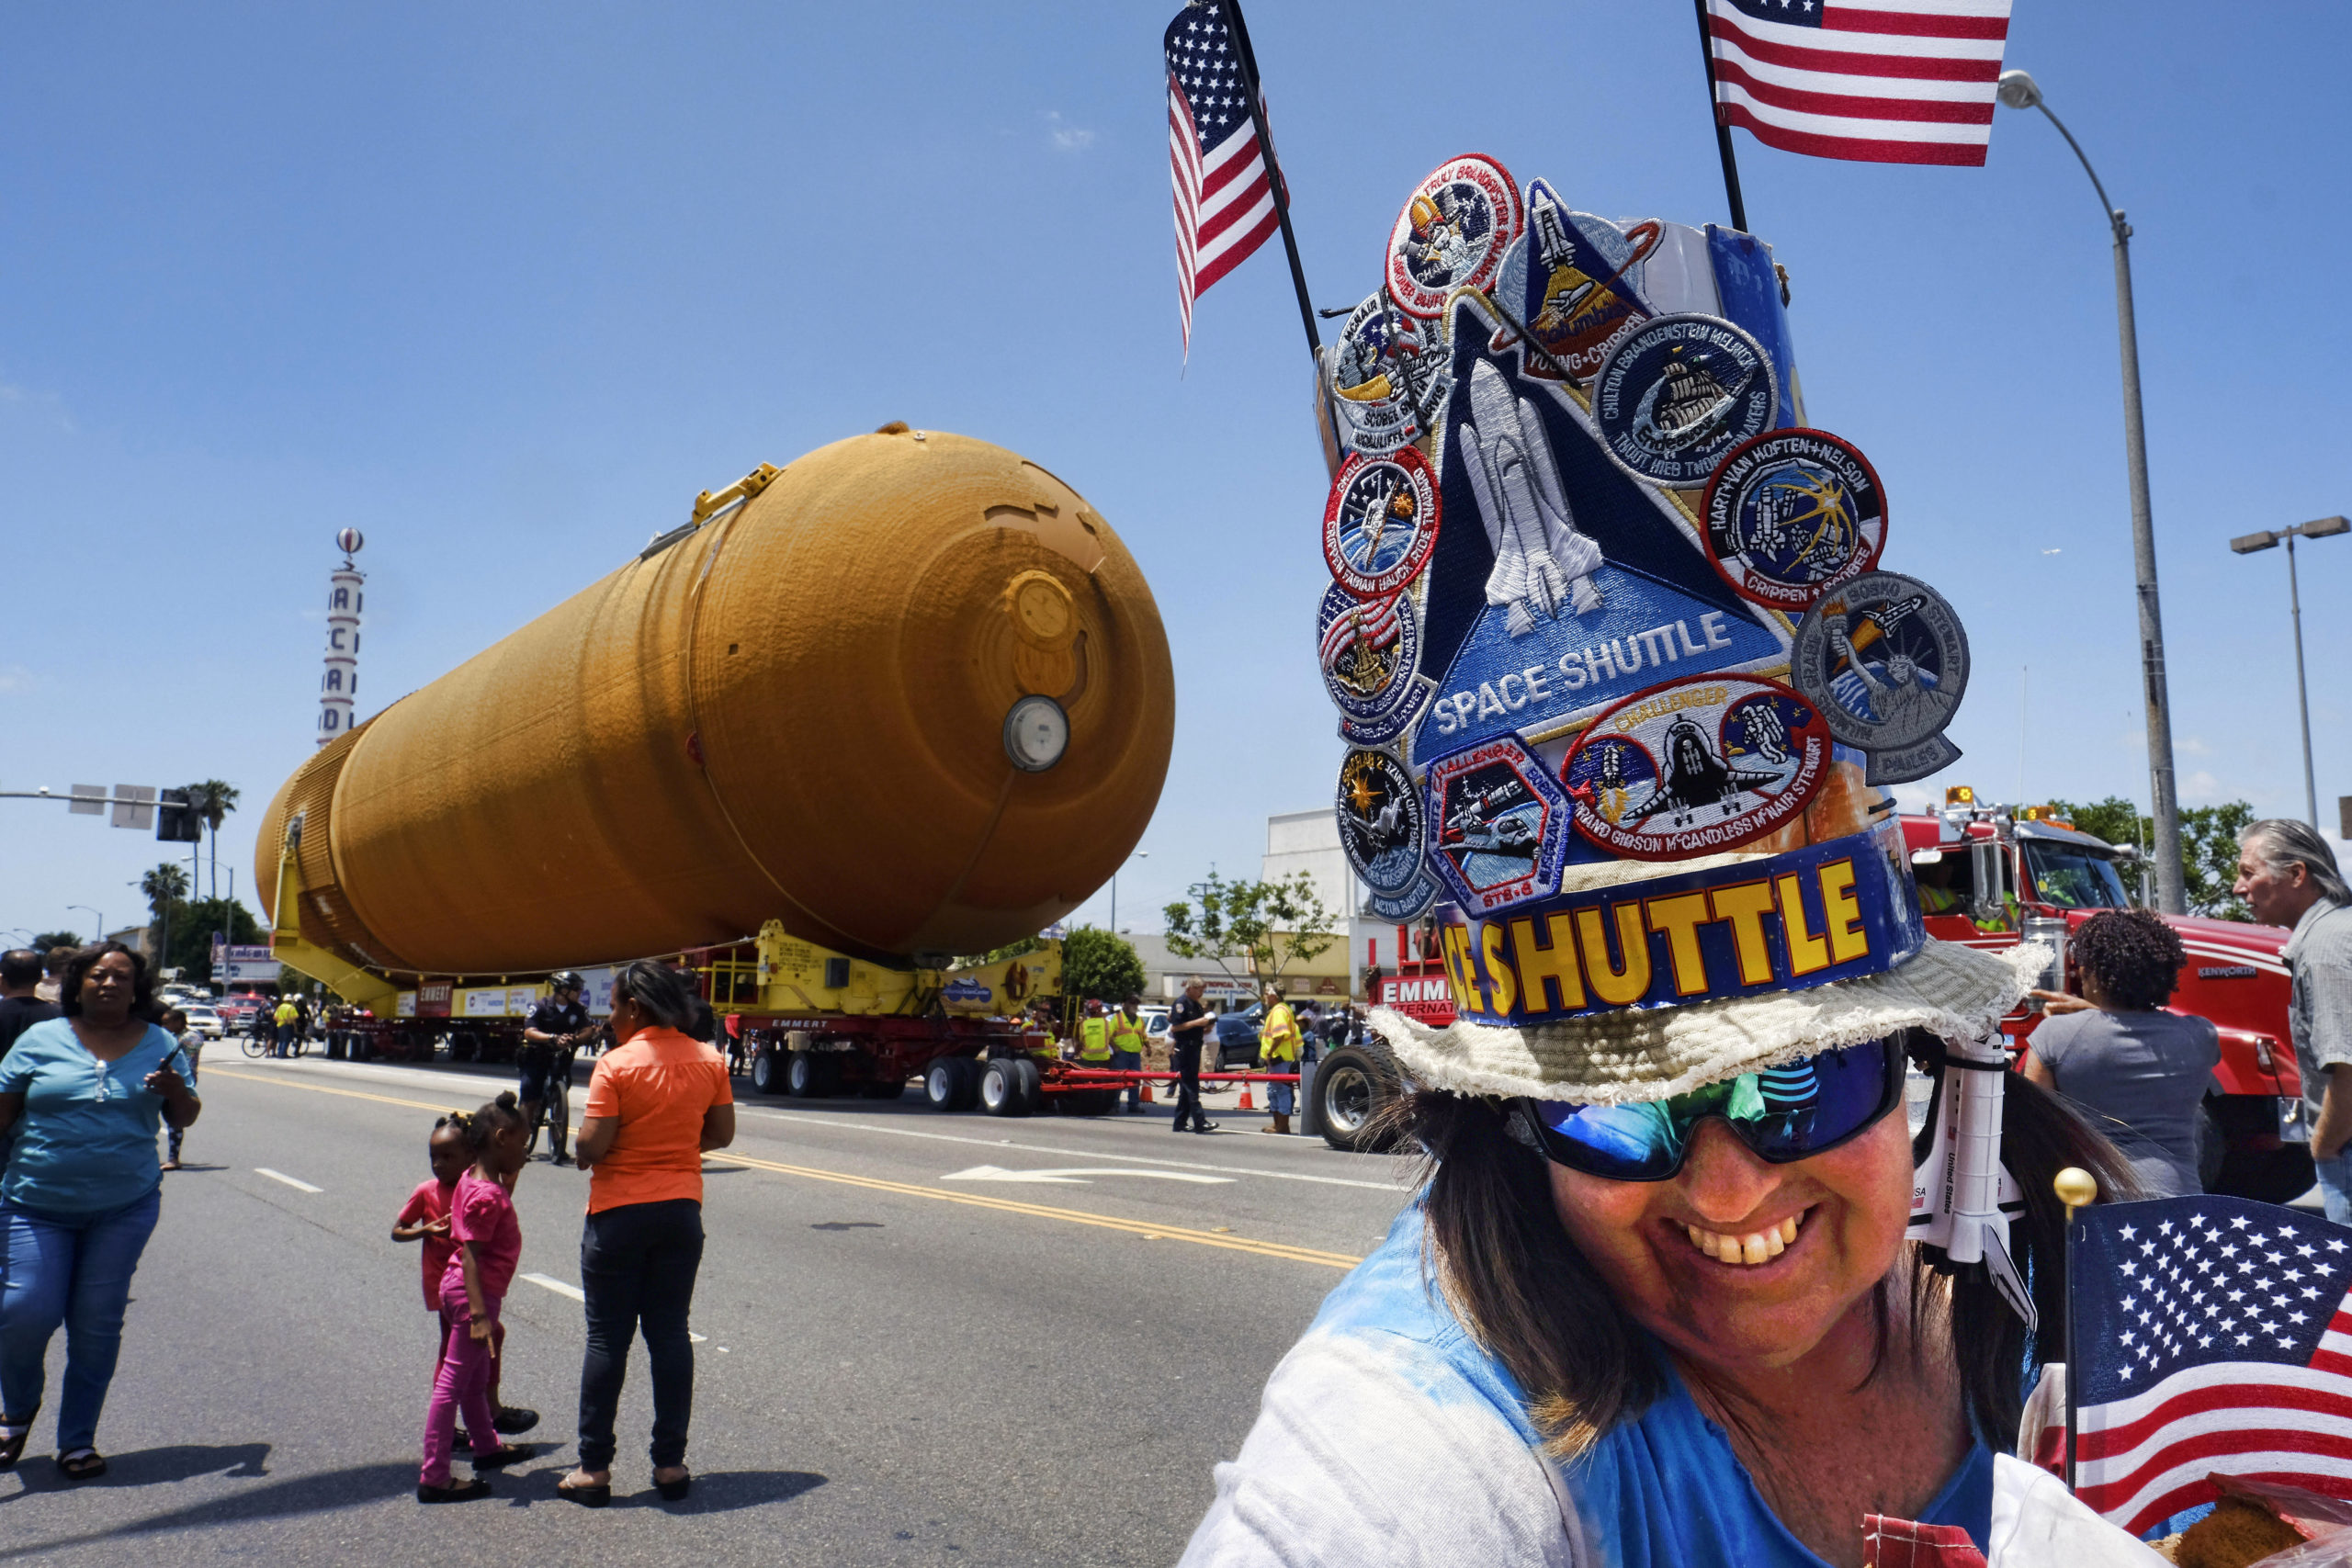 This Is How You Transport A 65,000-Pound Space Shuttle Fuel Tank Through A Crowded City